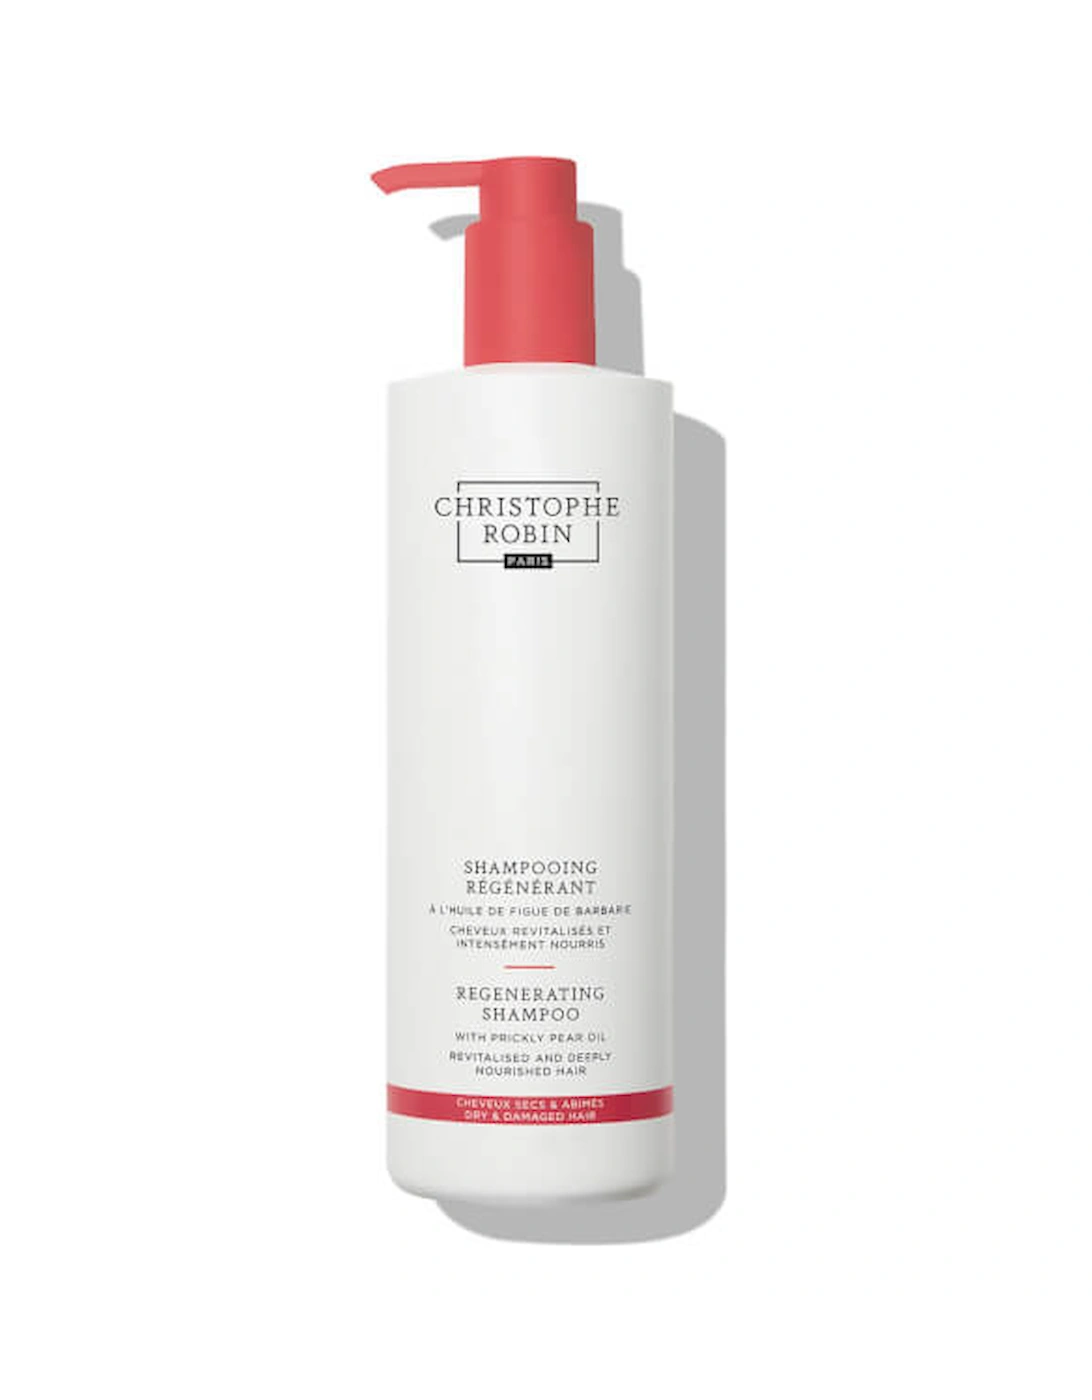 Regenerating Shampoo with Prickly Pear Oil 500ml - Christophe Robin, 2 of 1